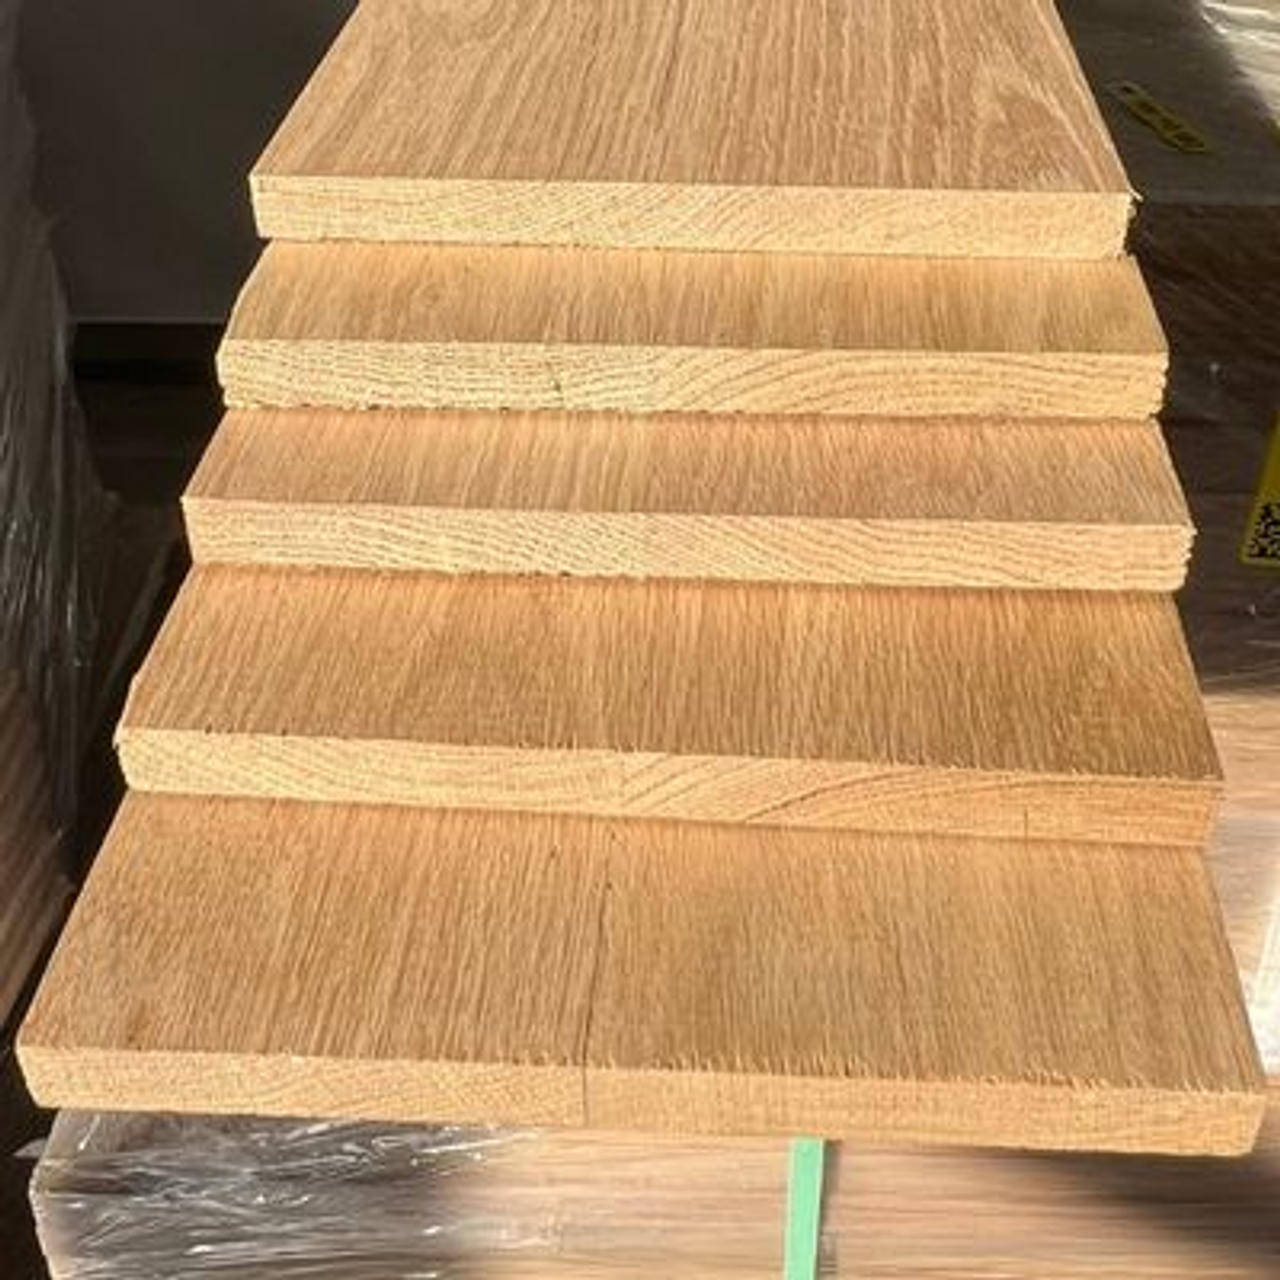 48" Unfinished Stair Riser- Red Oak